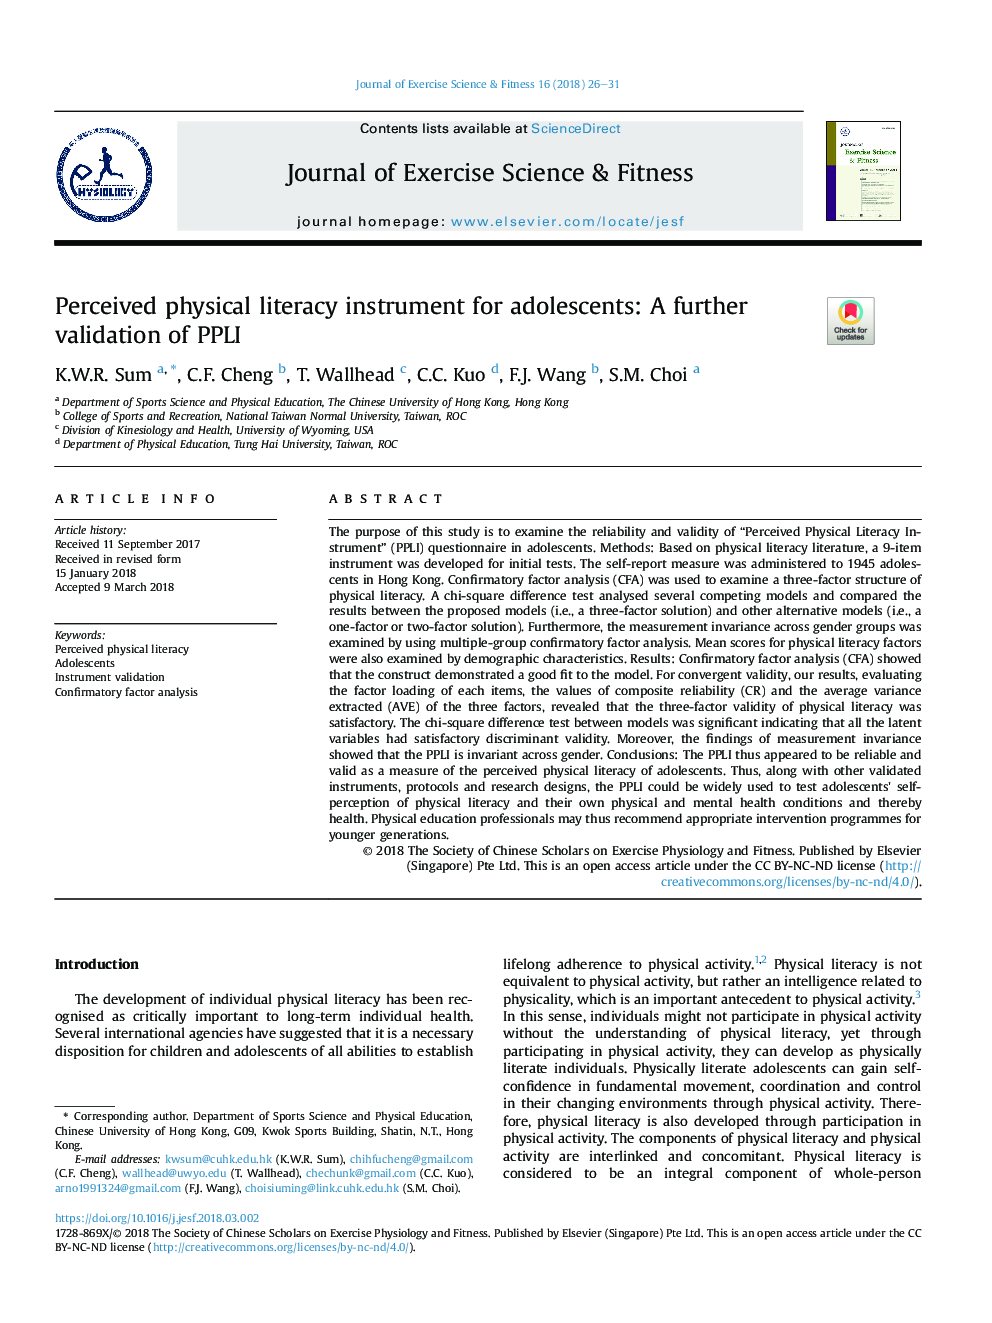 Perceived physical literacy instrument for adolescents: A further validation of PPLI